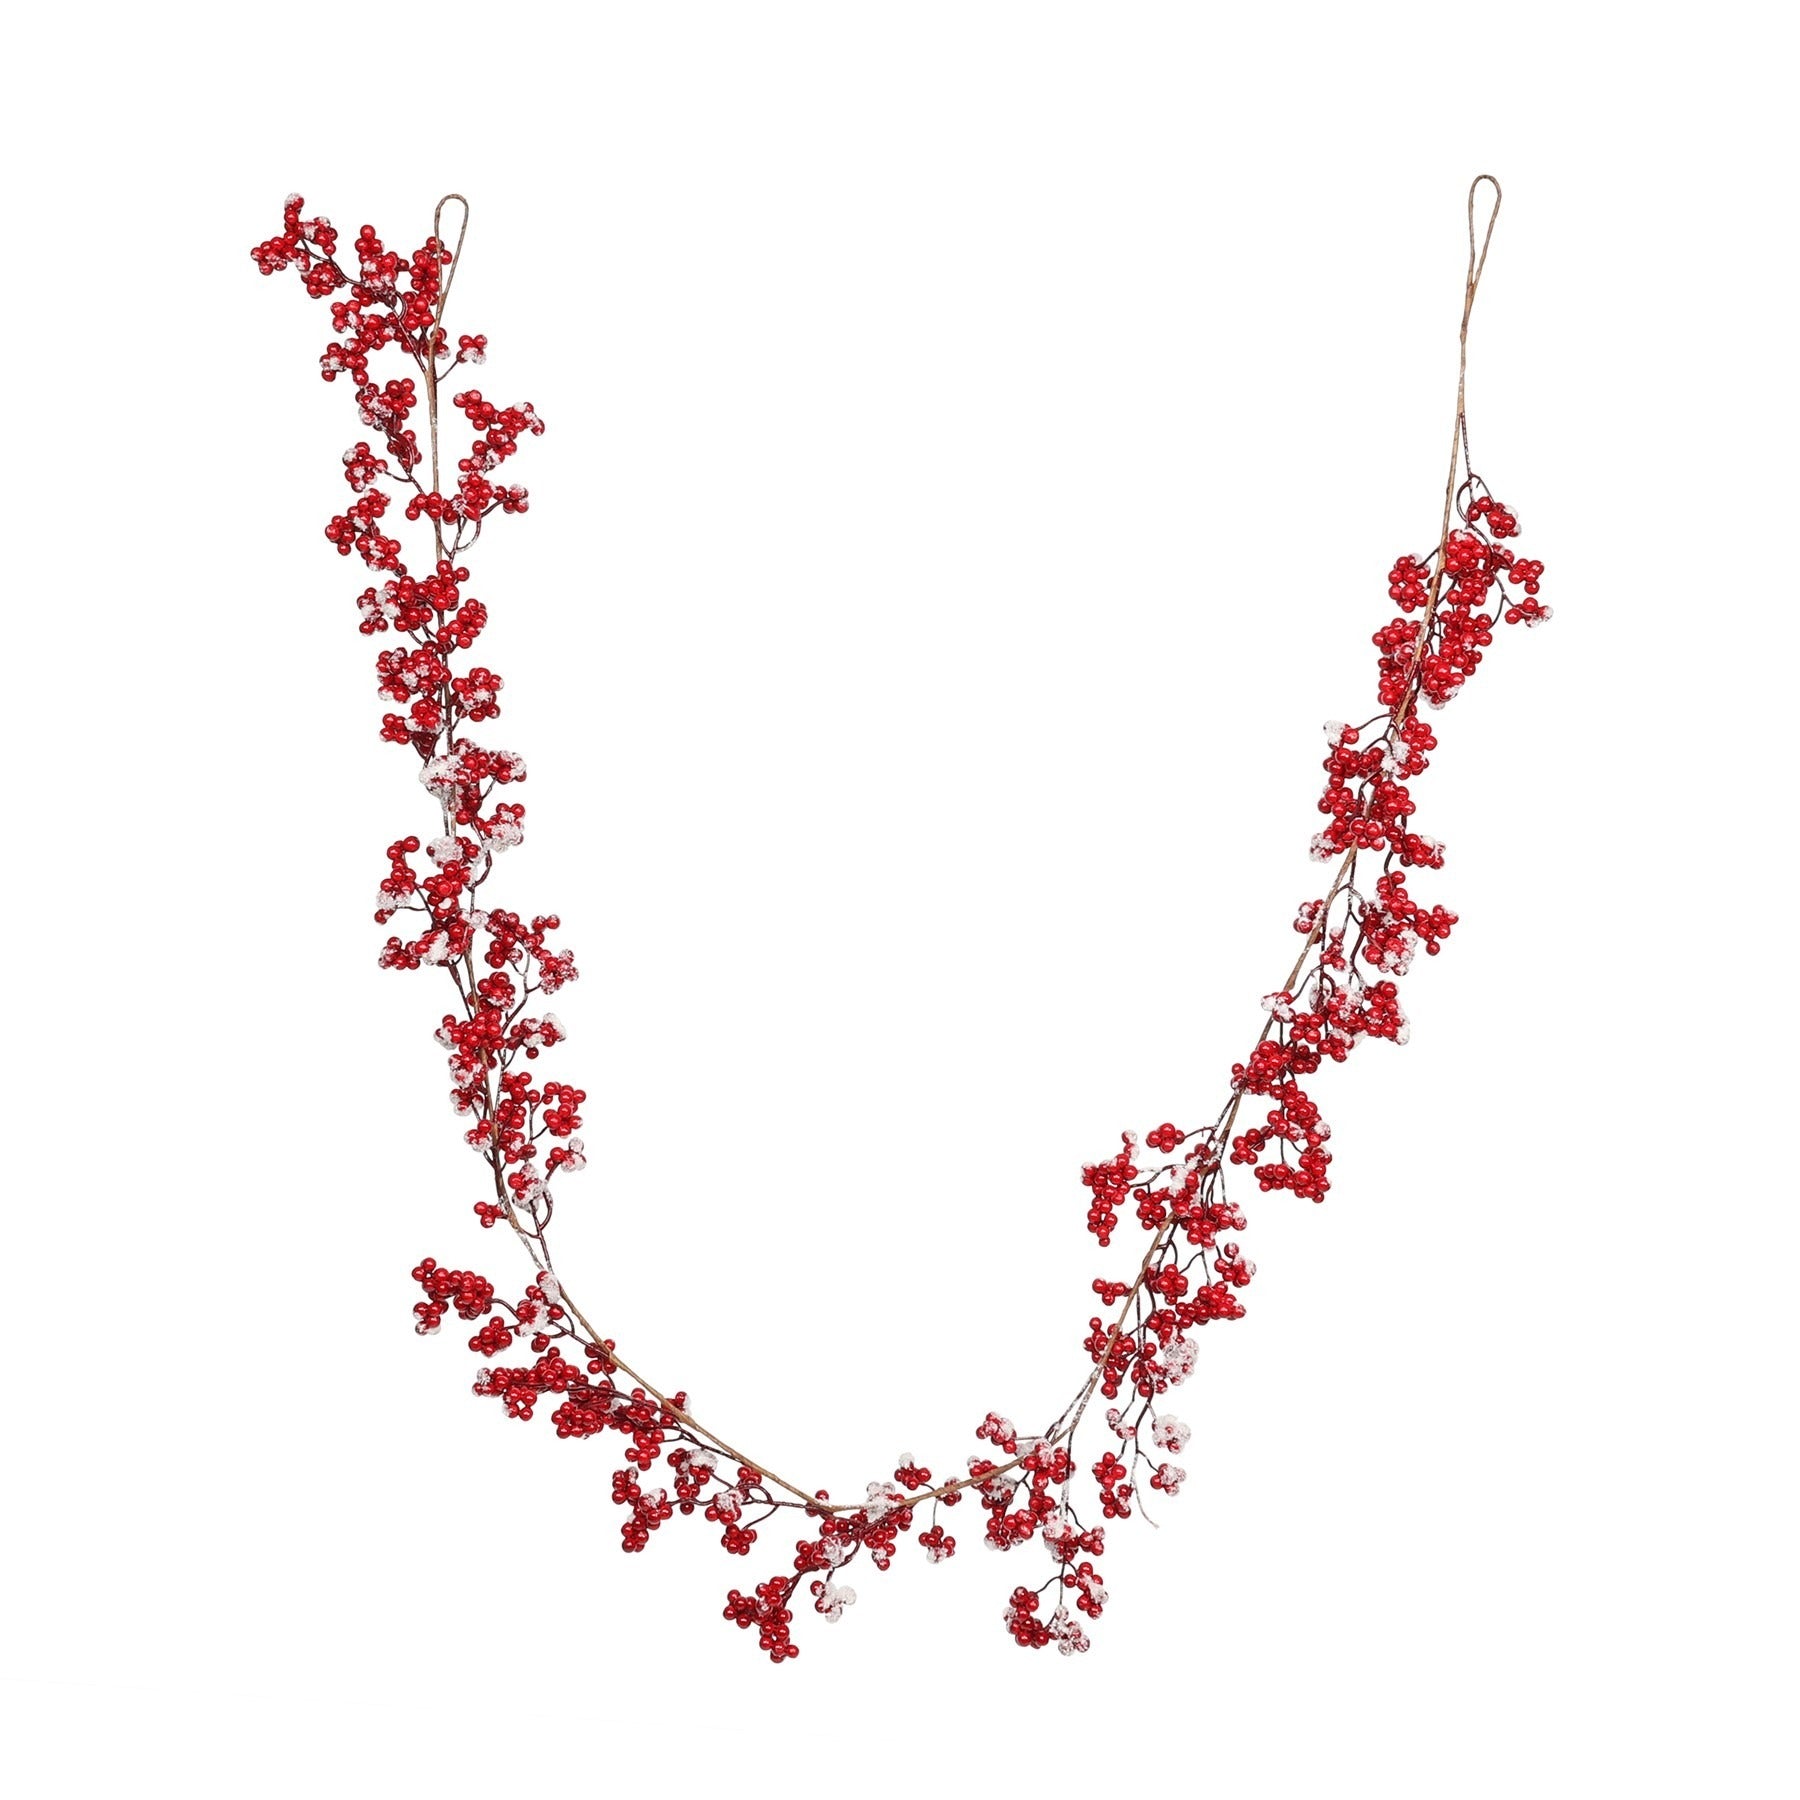 View Red Berry Frosted Garland 6ft information